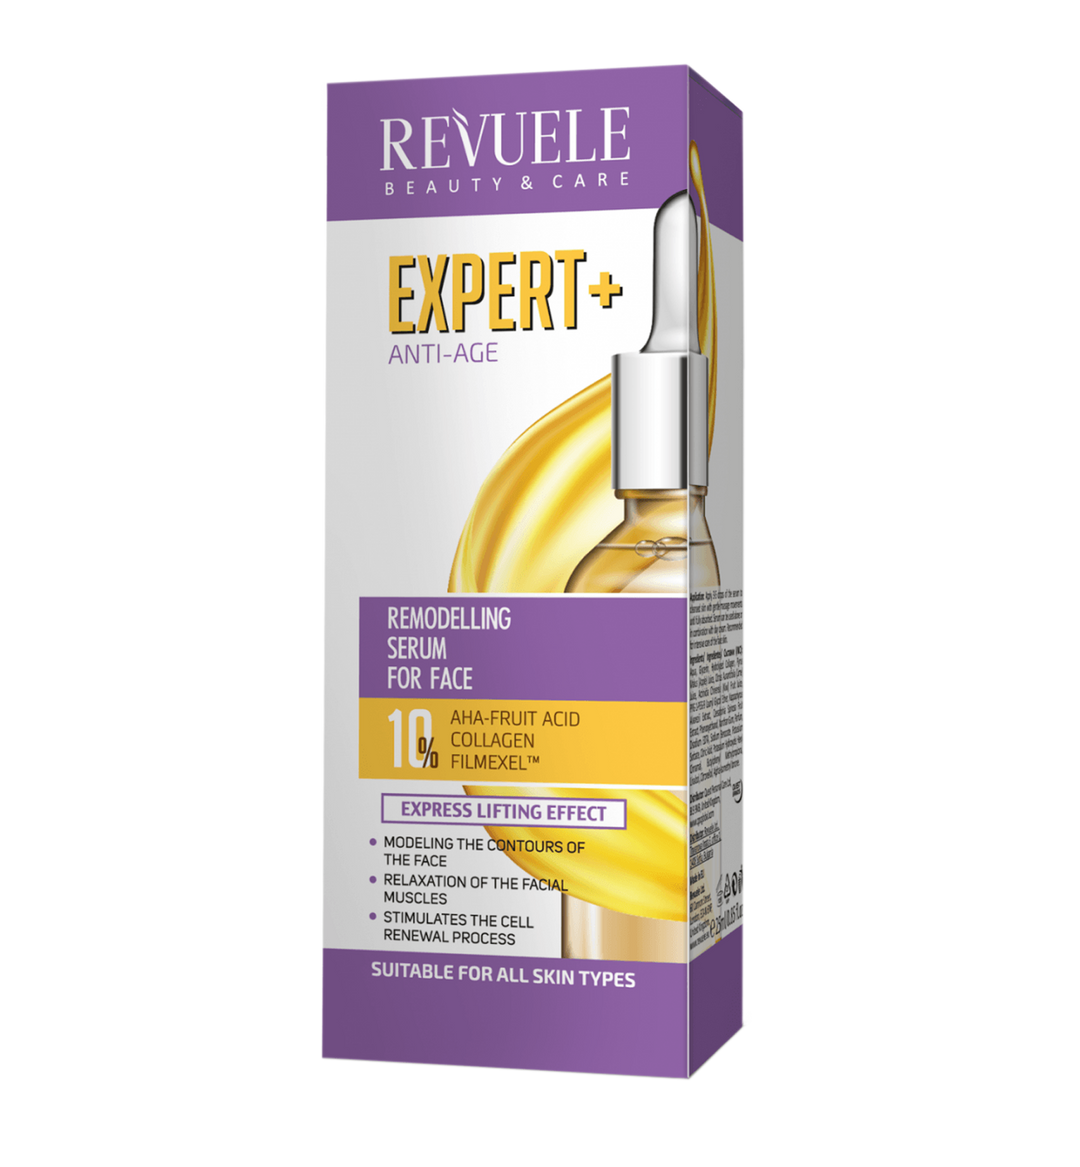 Revuele Expert+ Remodeling Serum for Face